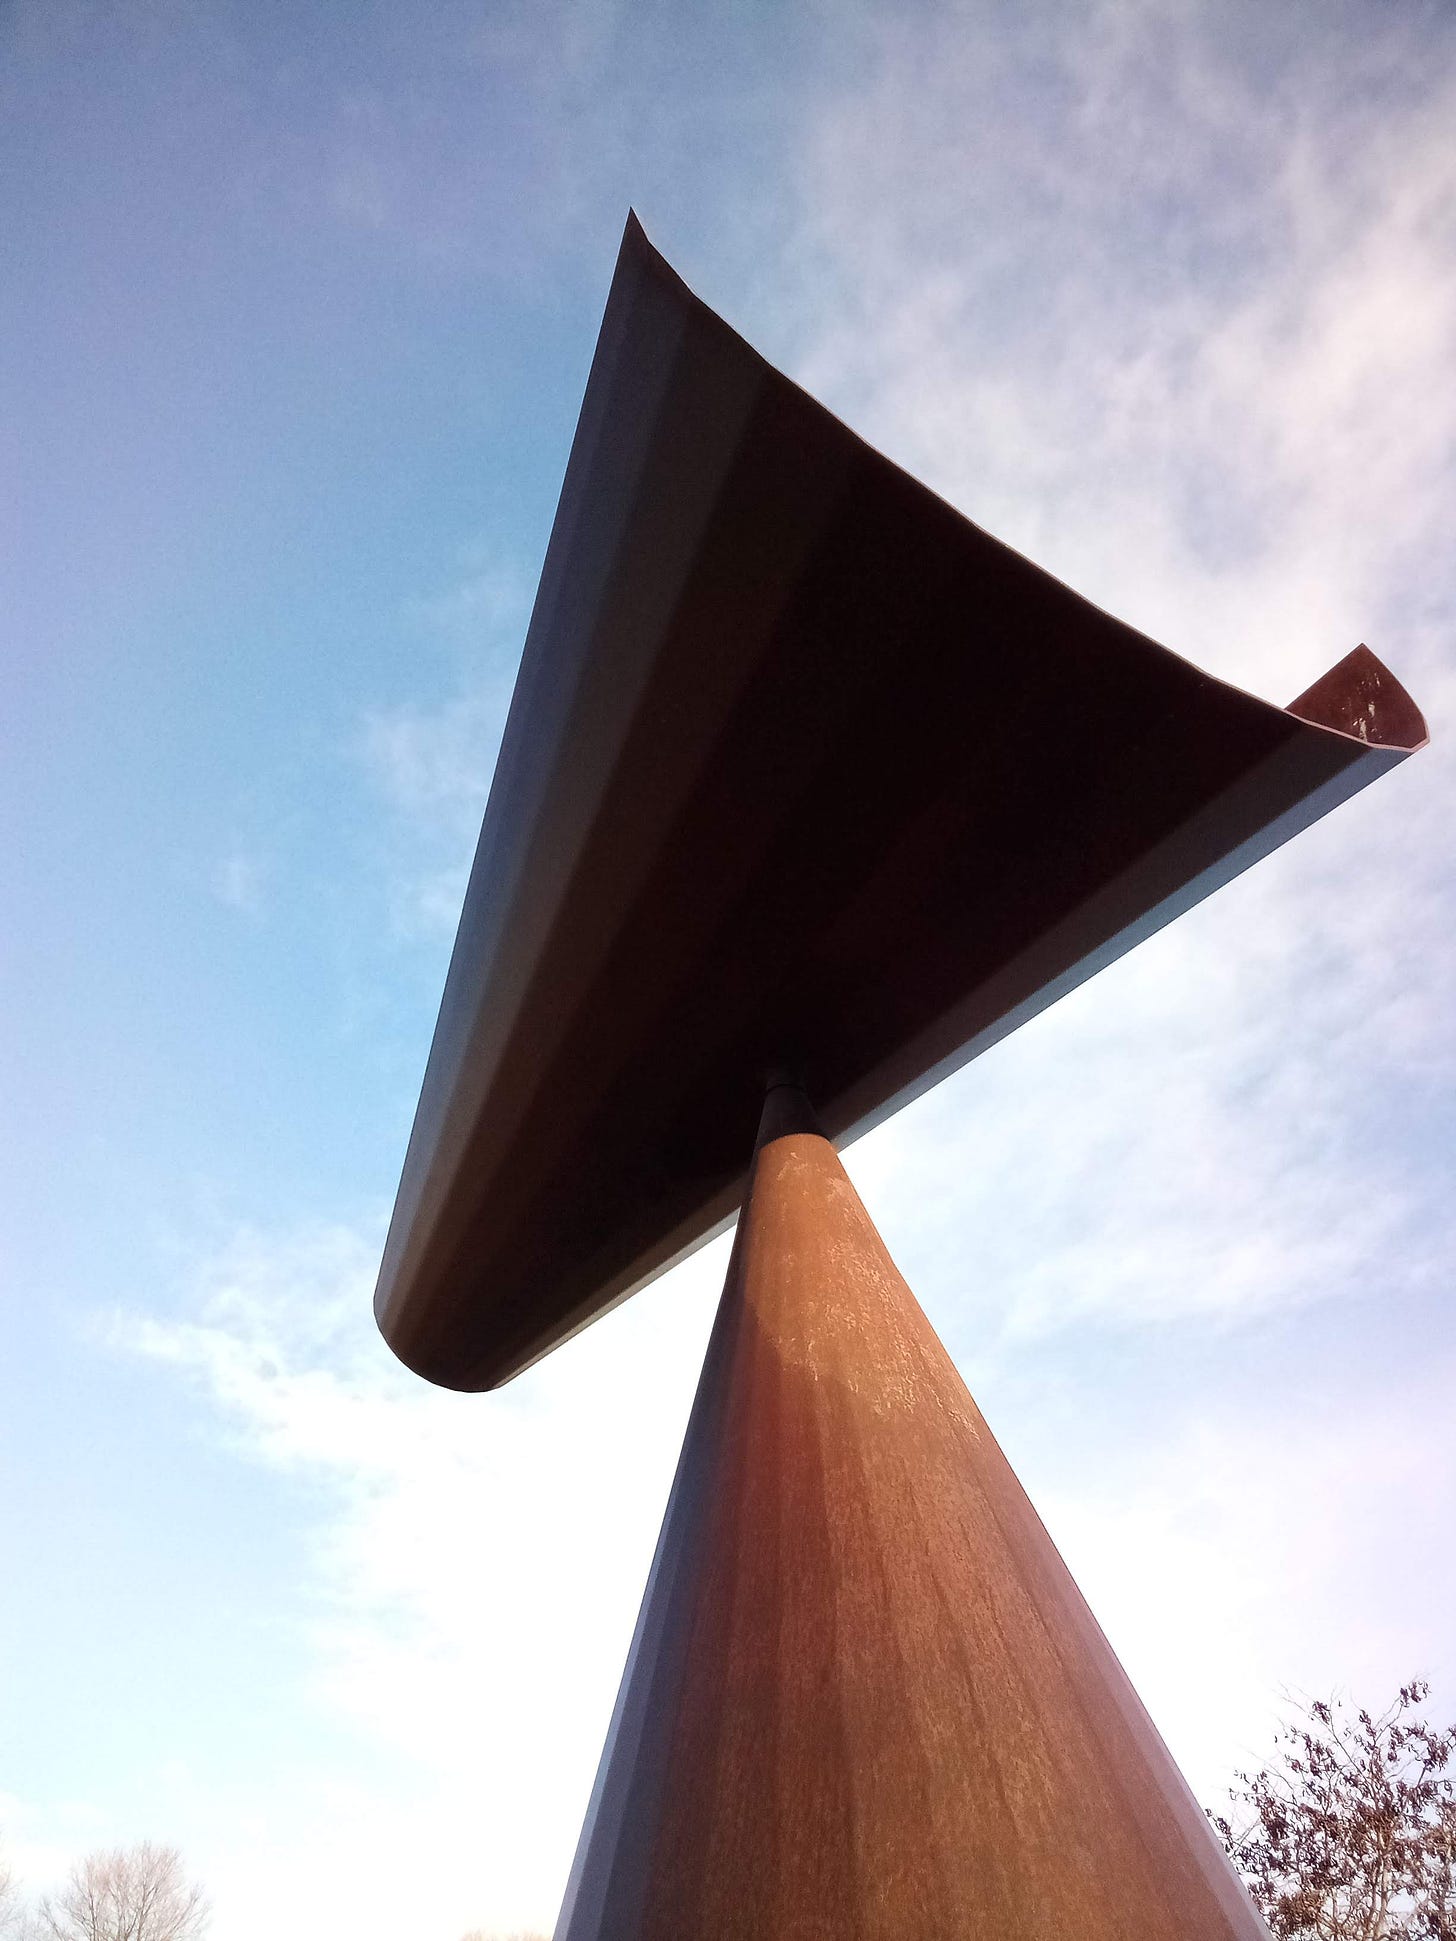 Bronze funnel wind sculpture against blue sky and clouds